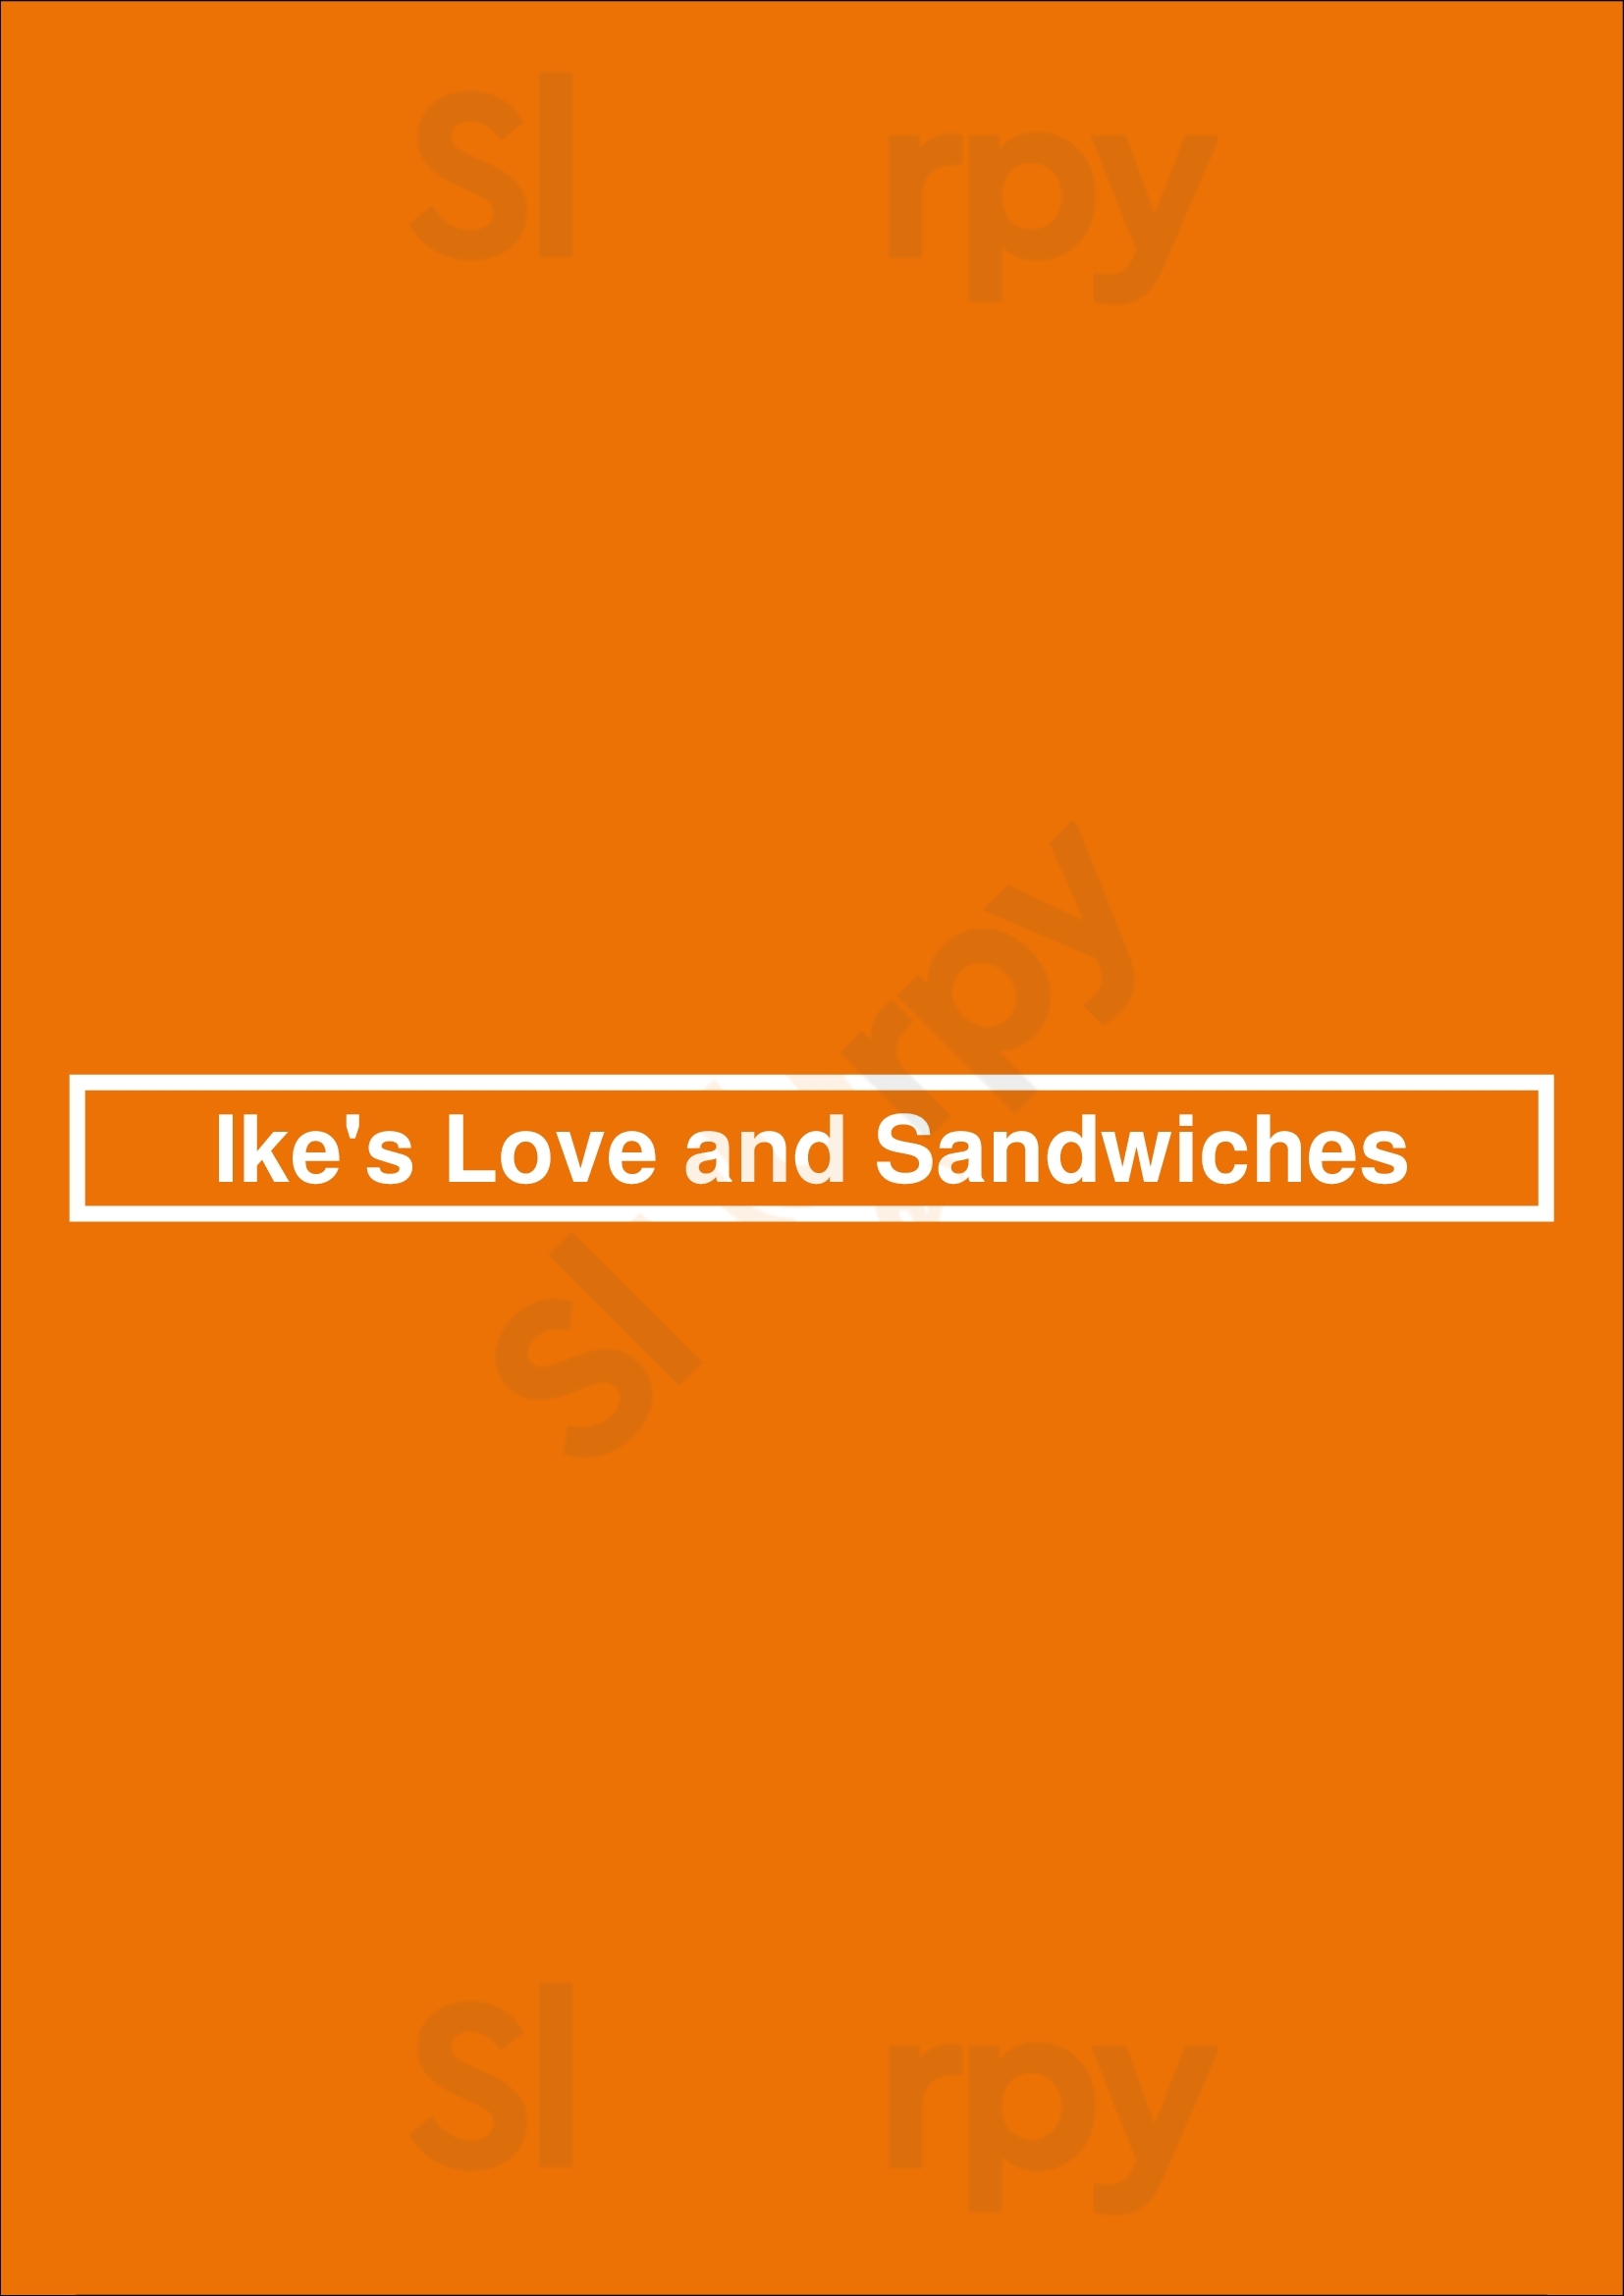 Ike's Love And Sandwiches Los Angeles Menu - 1